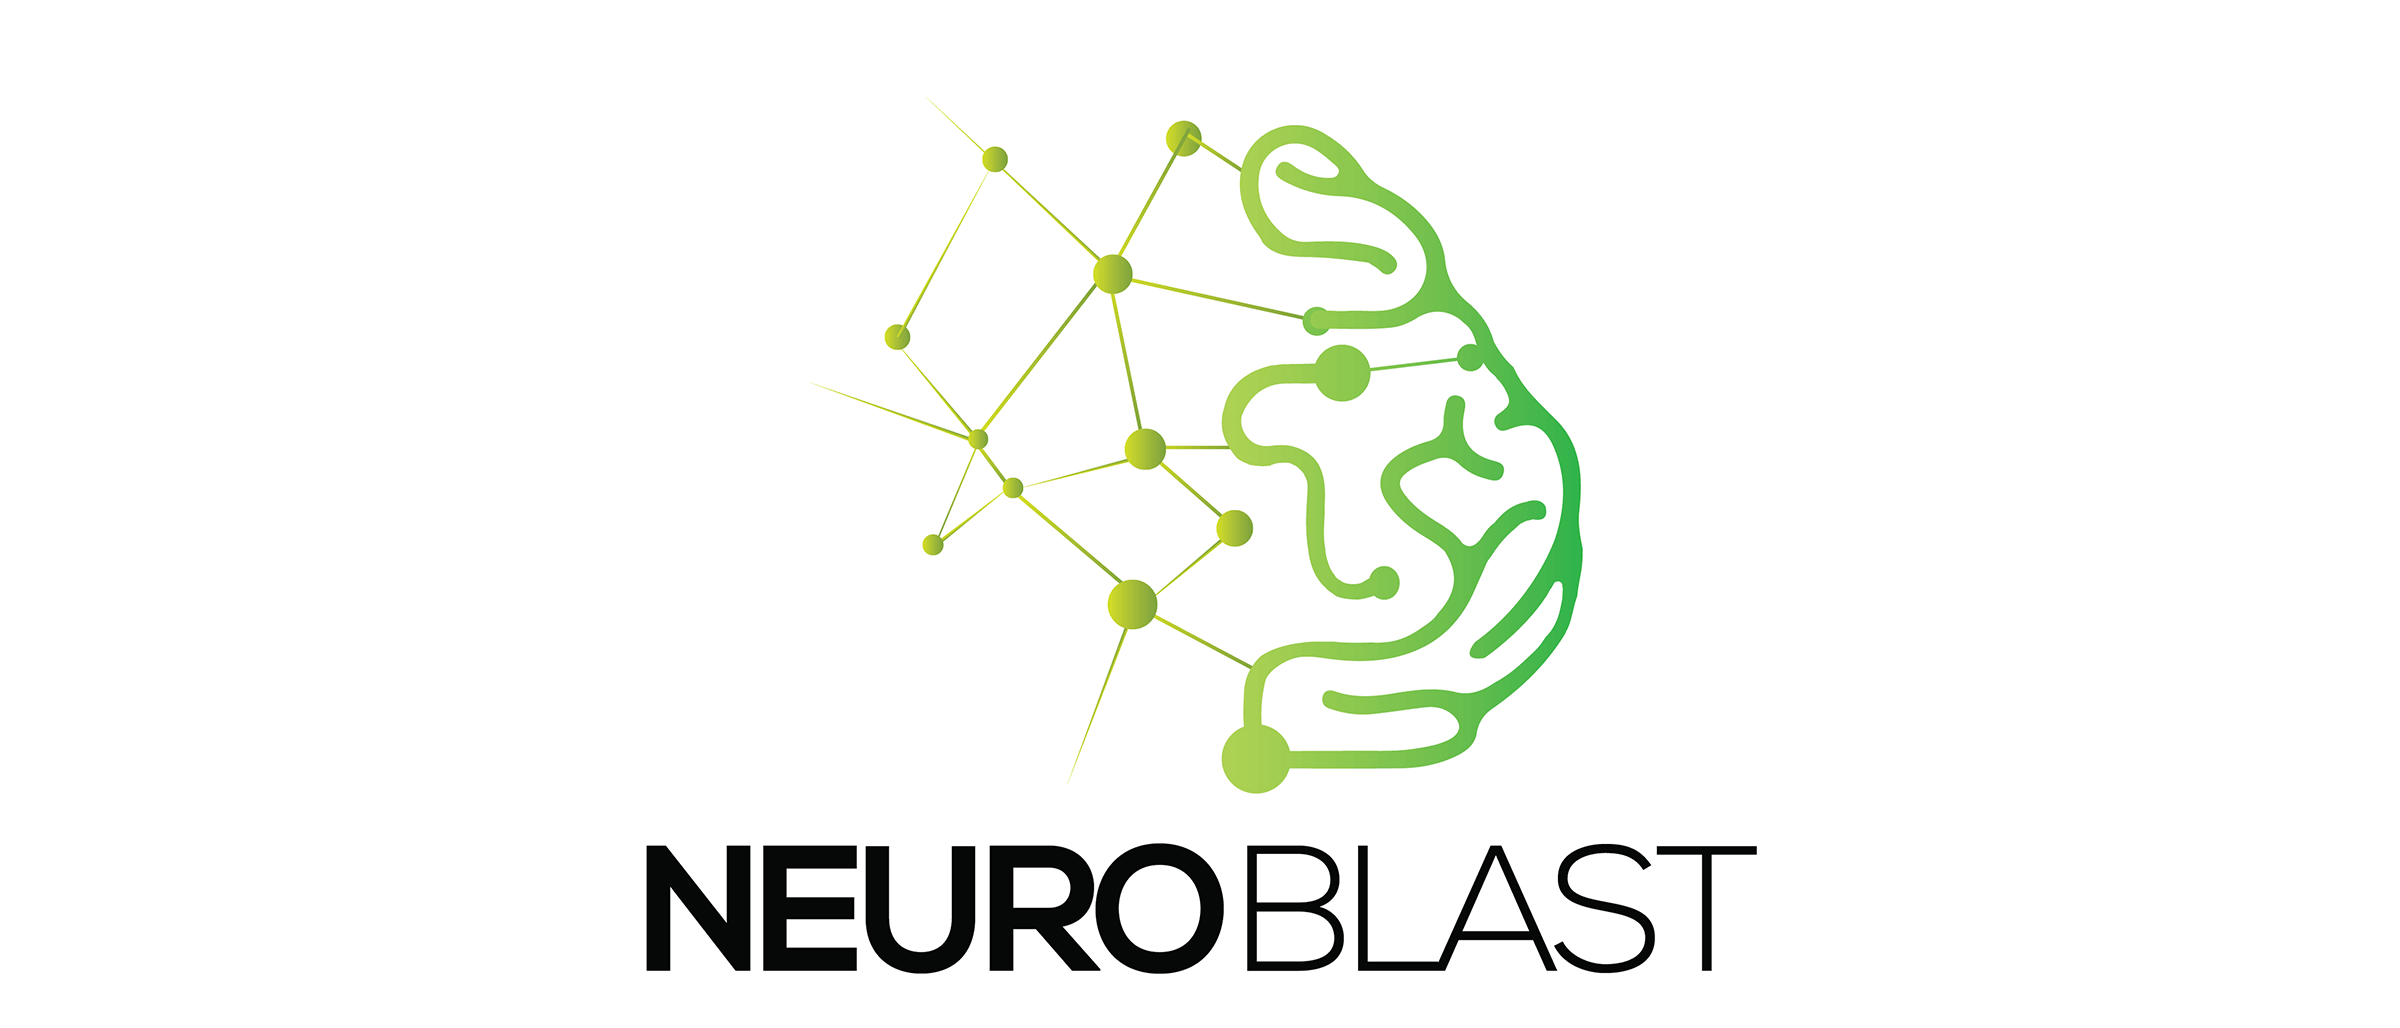 NEUROBLAST: IT support for the nervous system